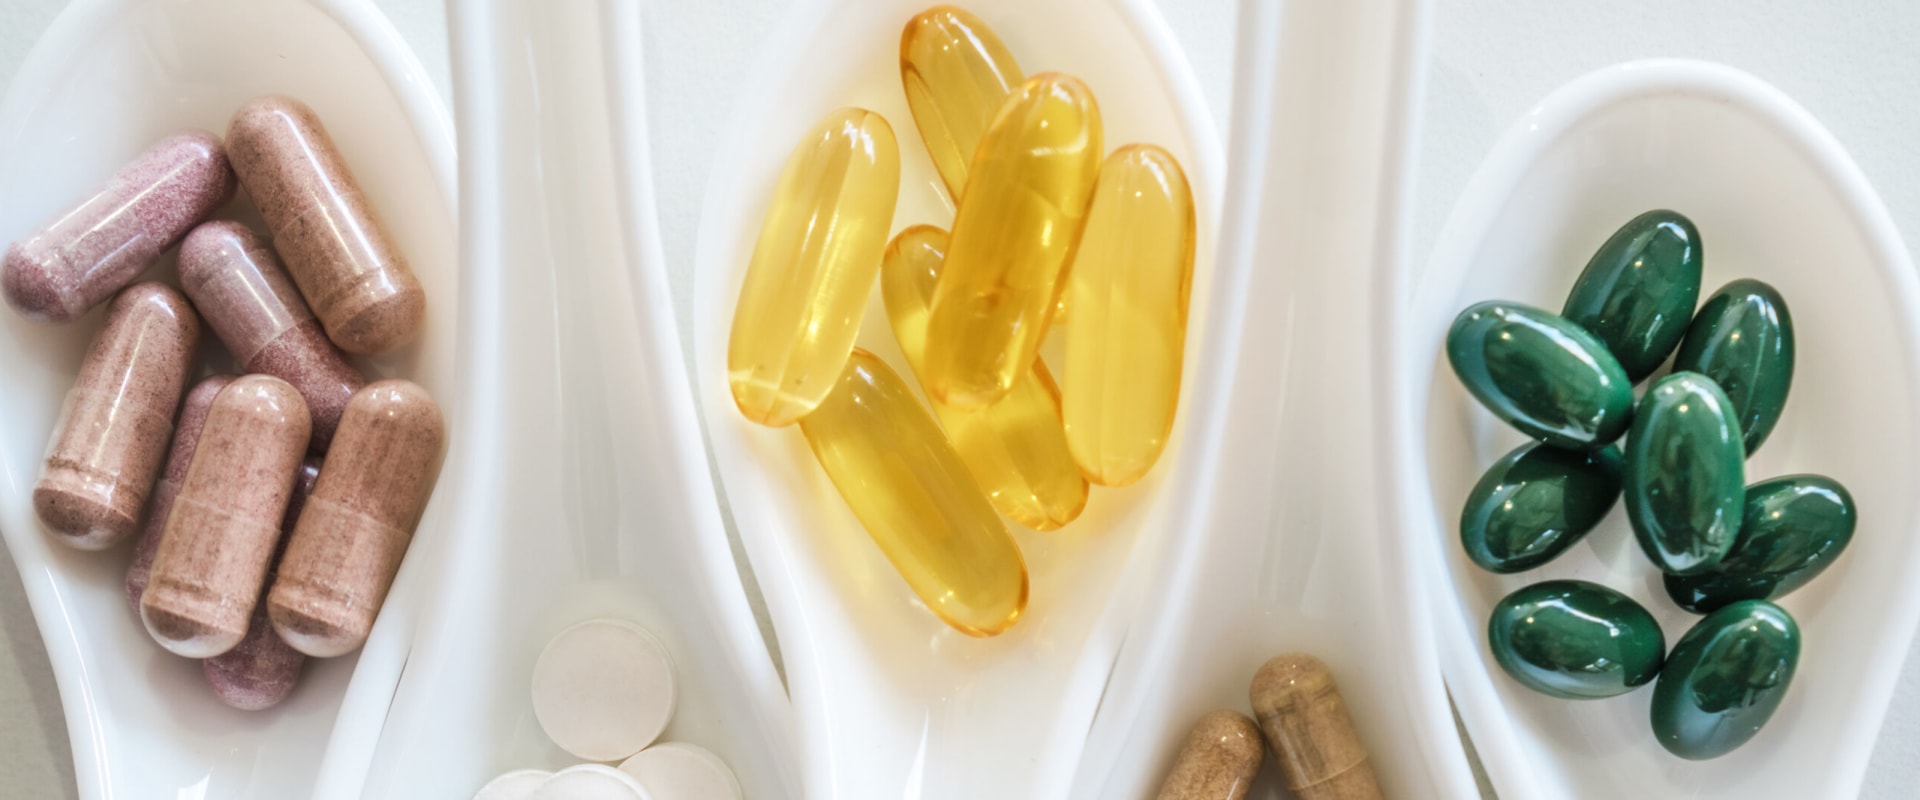 How does the ftc regulate supplements?